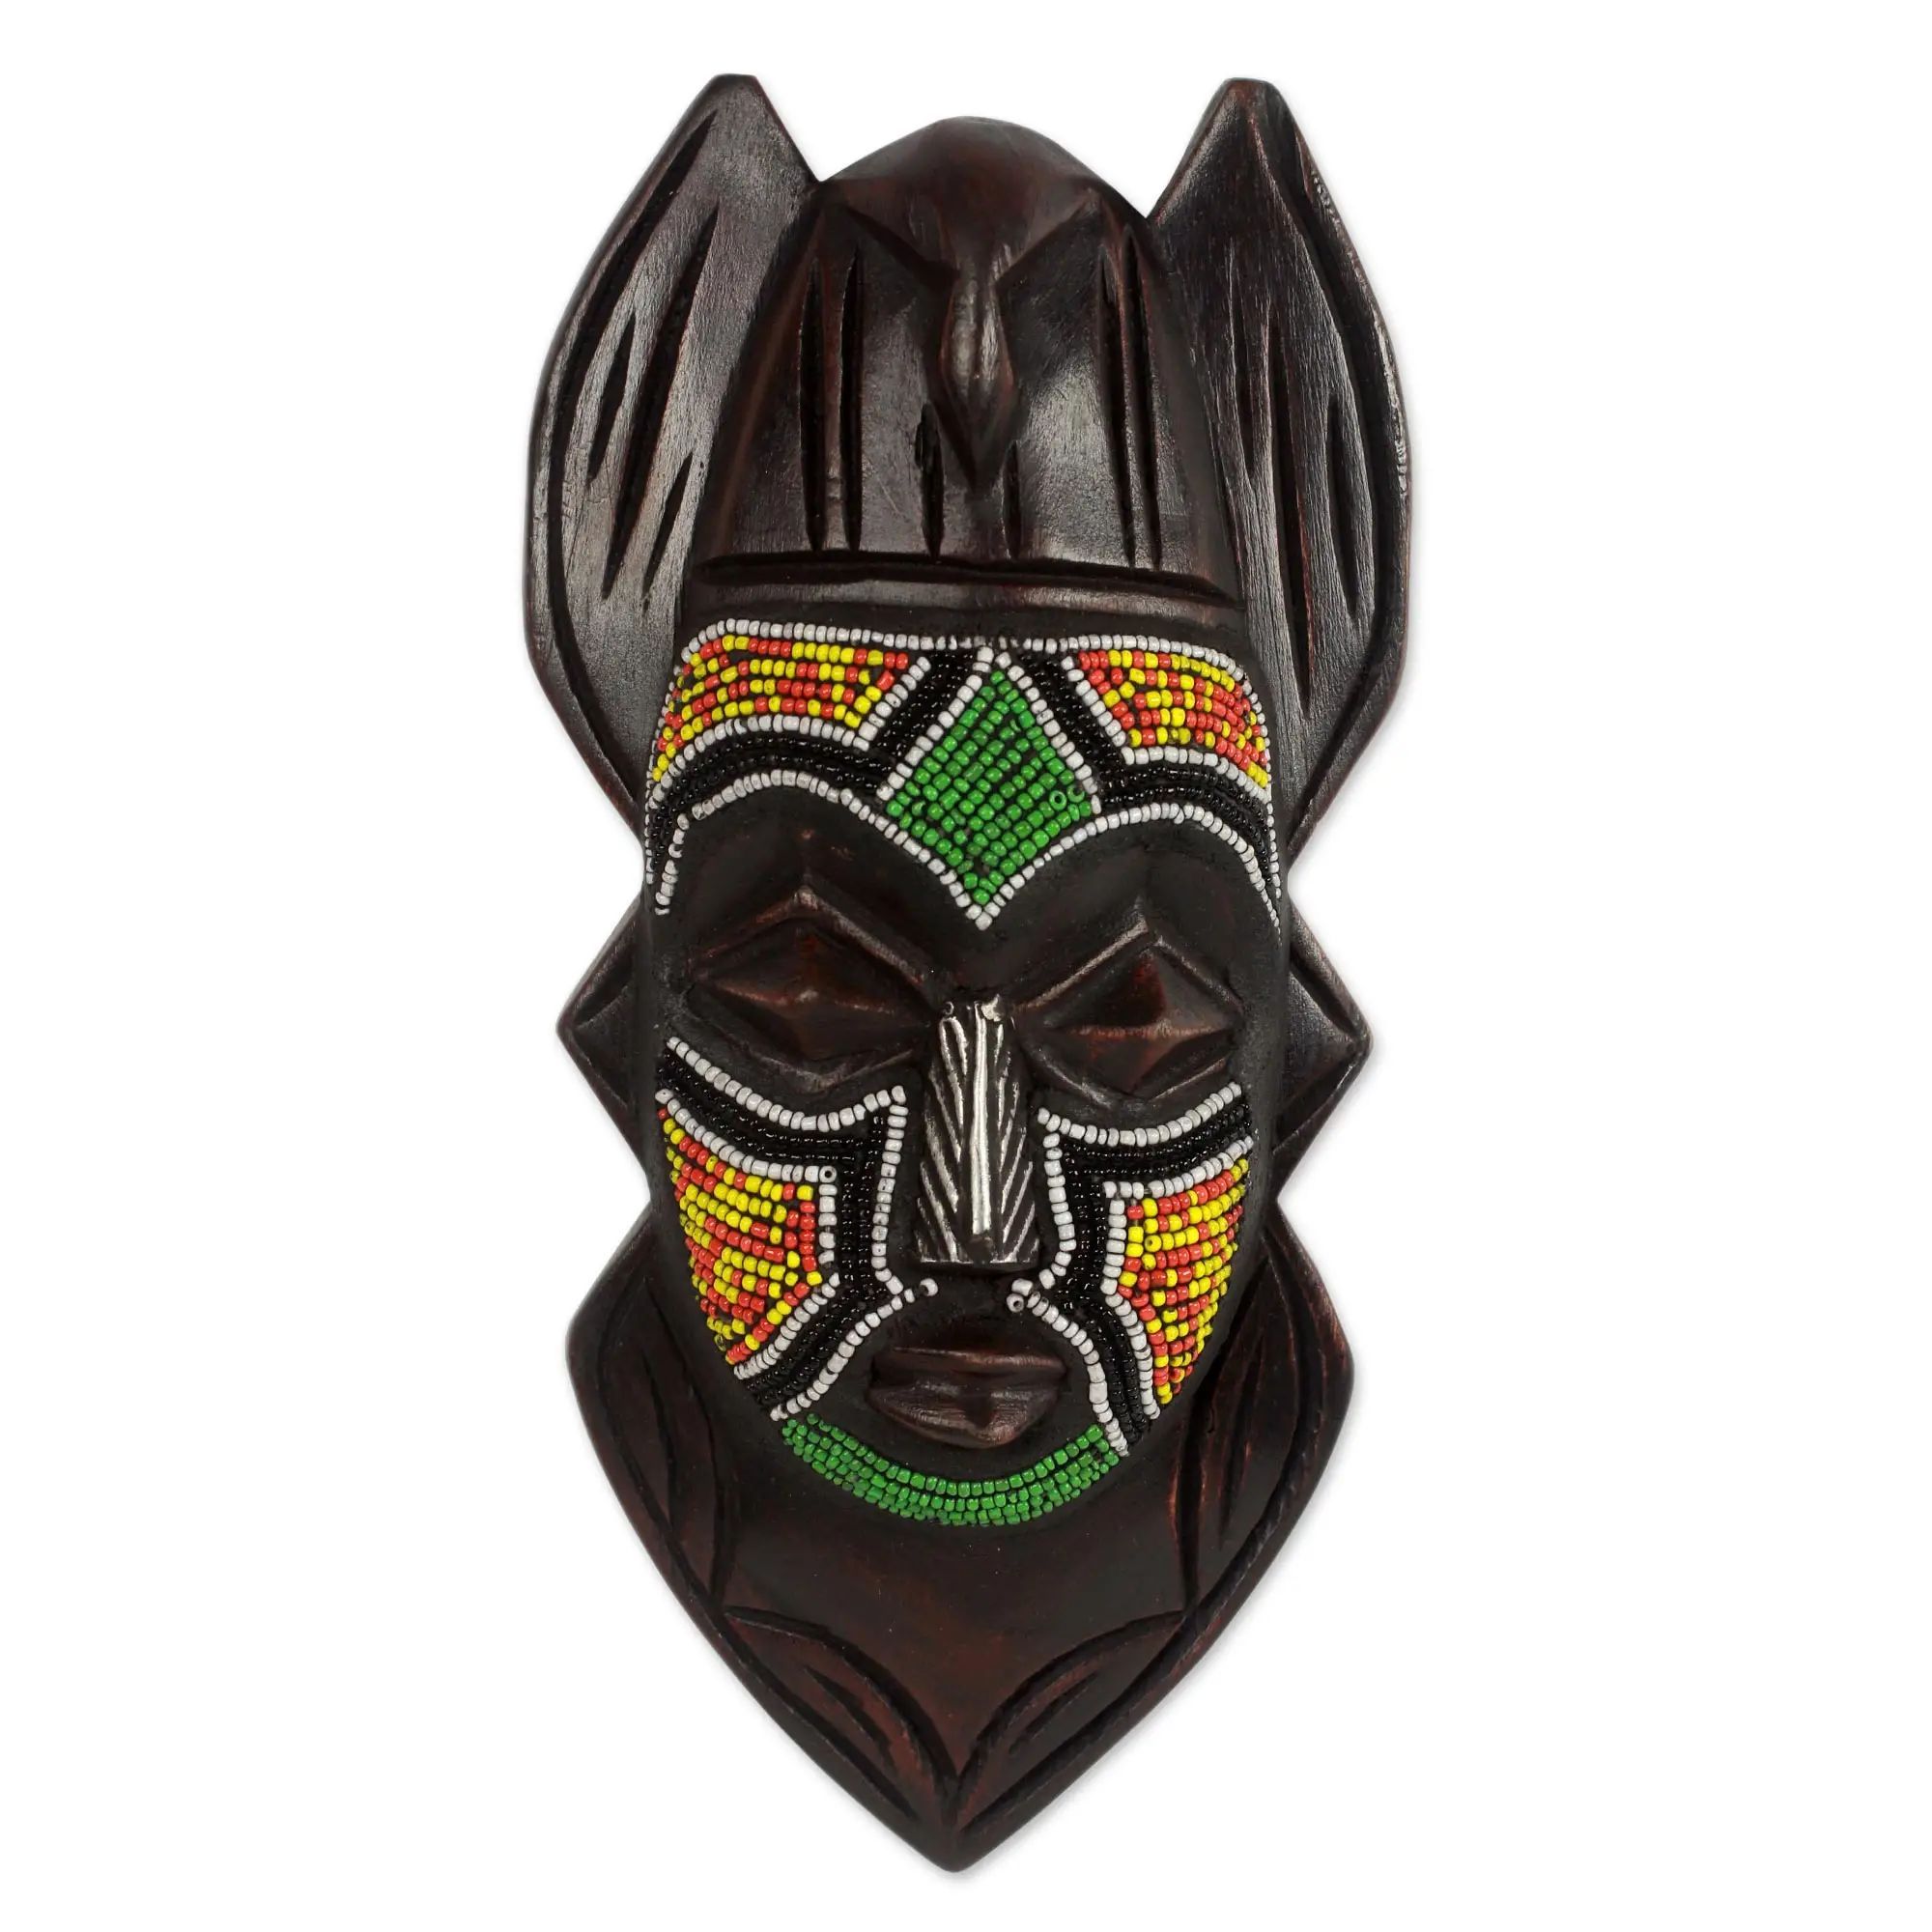 Authentic African Handmade Dove Anoma Ba Mask by Awudu Saaed | The ...